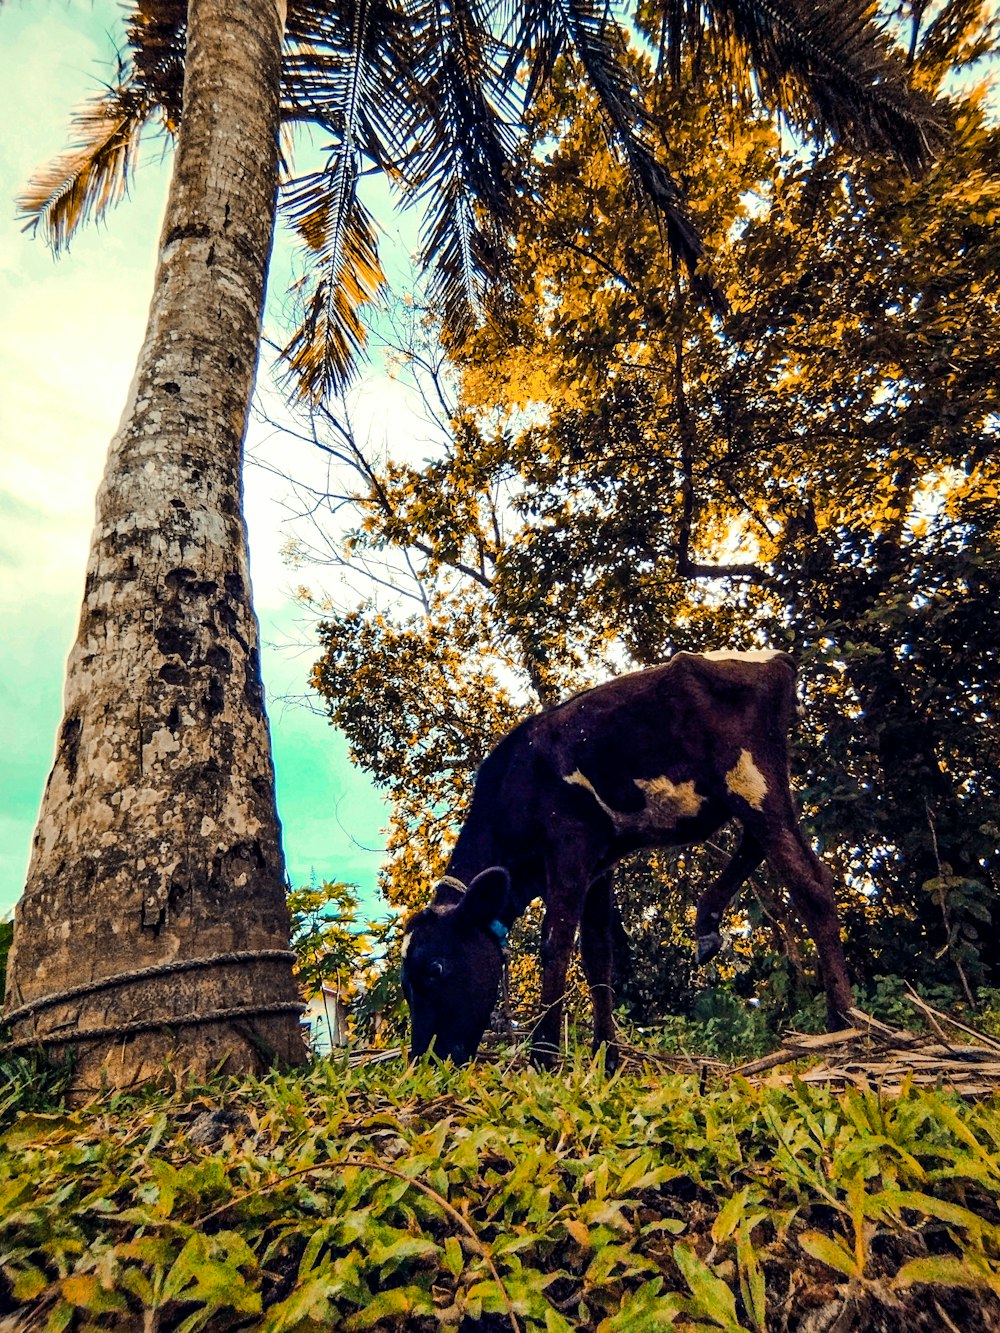 a cow grazing on grass next to a palm tree